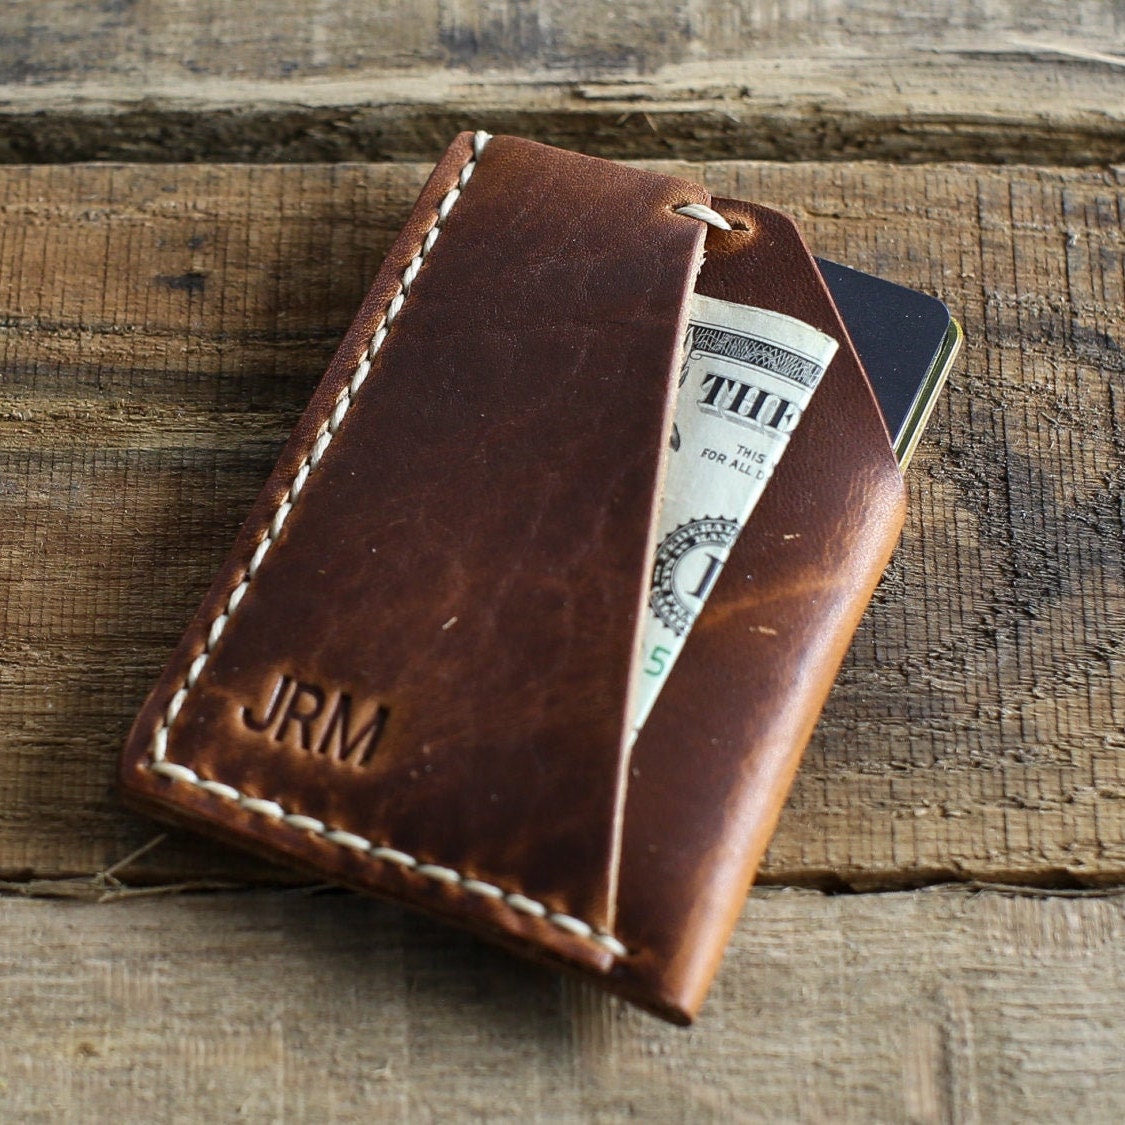 Compact Keychain Wallet in Horween Leather | Hand Made to Order in Houston TX 2 Pockets / 1 Pocket / Keyring / Nickel